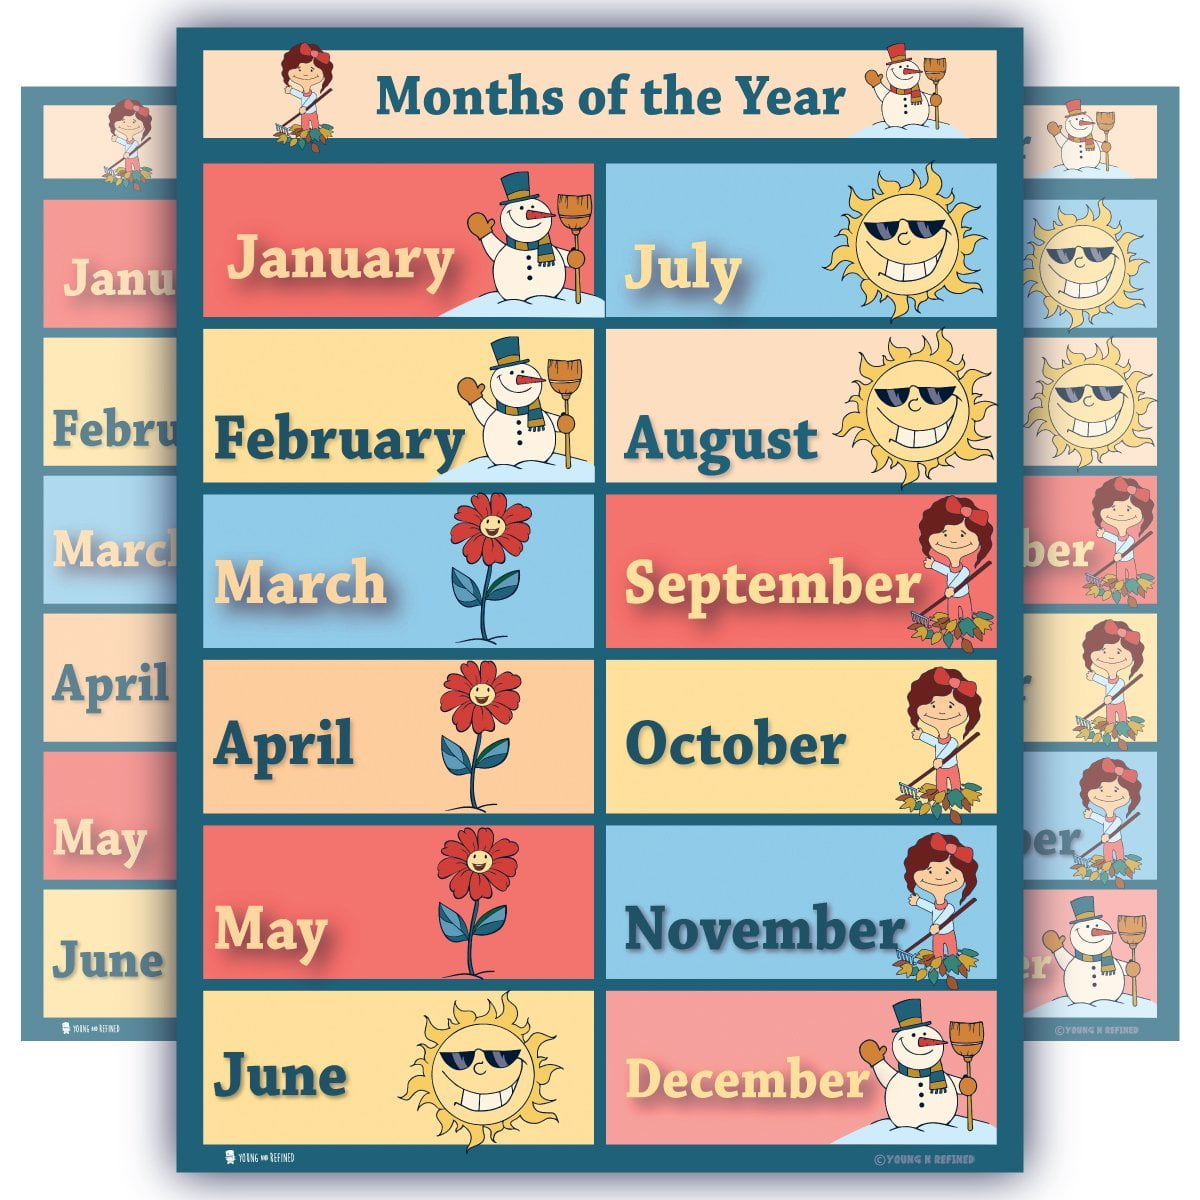 MONTHS OF THE YEAR POSTEREDUCATIONAL WALL CHARTGIRLS BOYS KIDS CHILDREN 